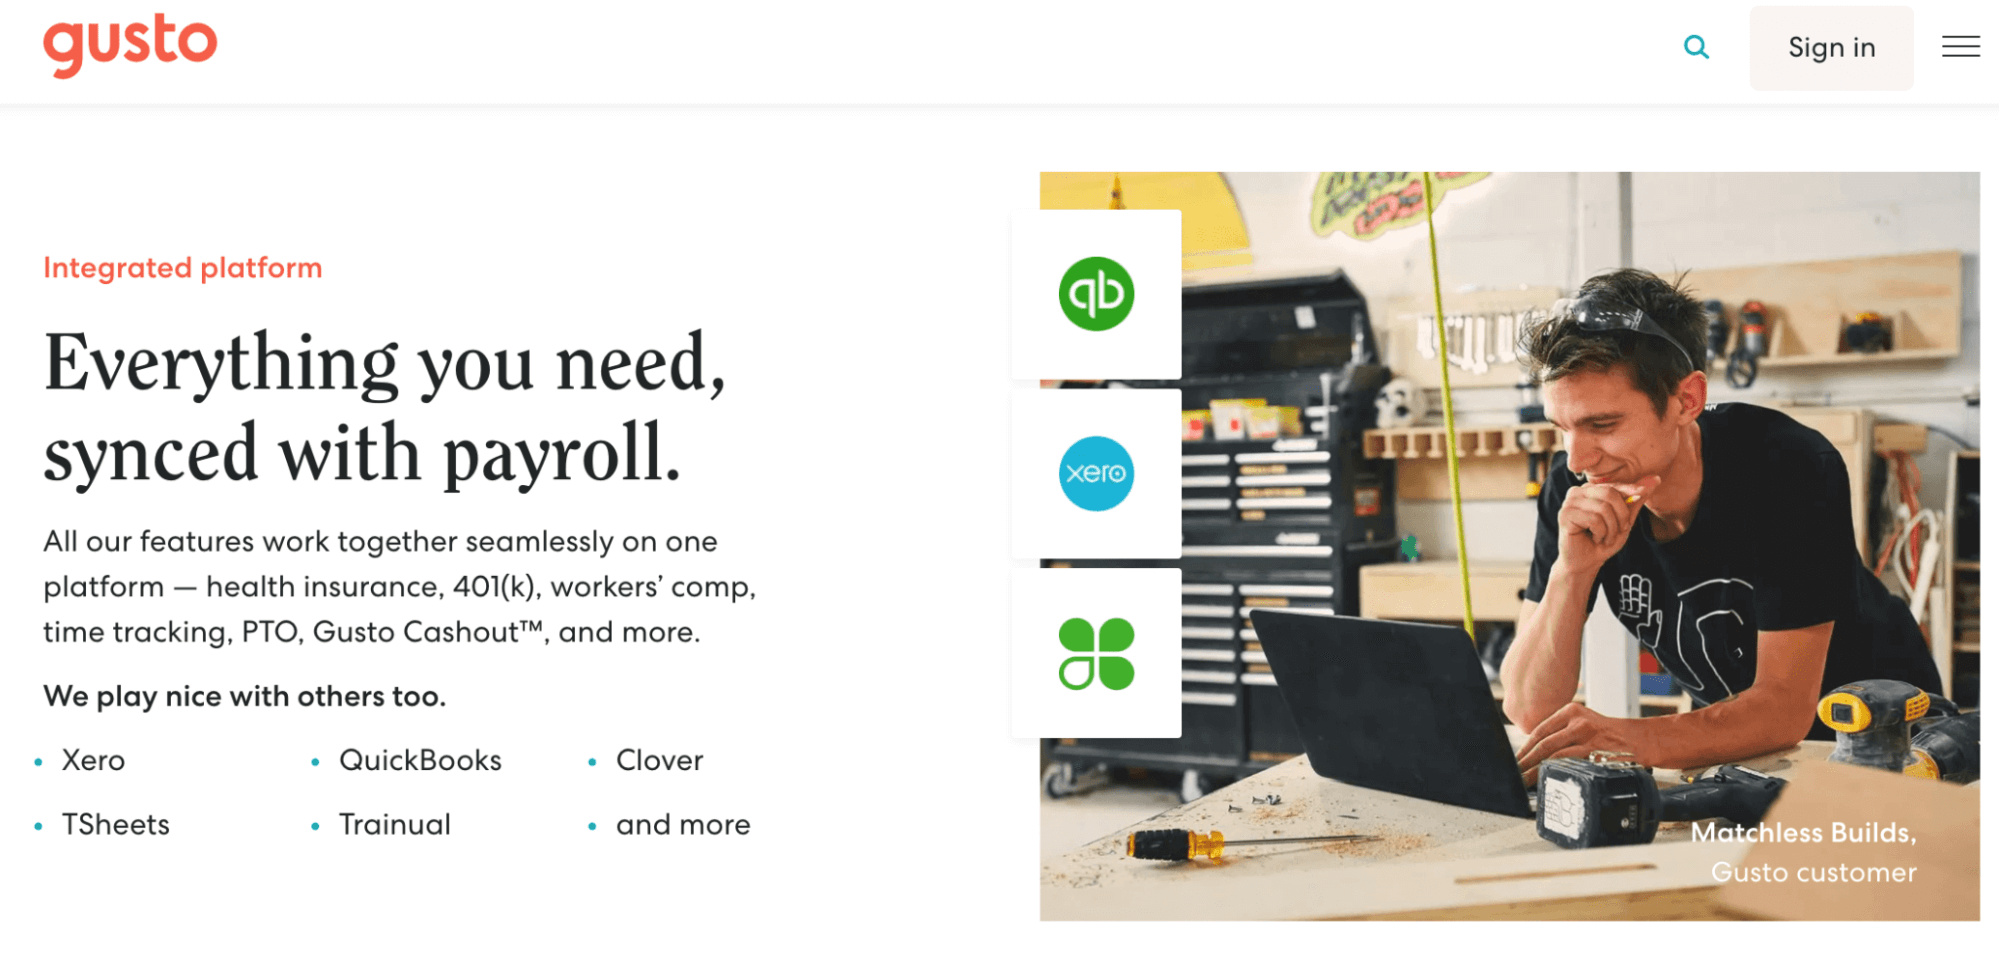 Gusto payroll services everything you need, synced with payroll page.